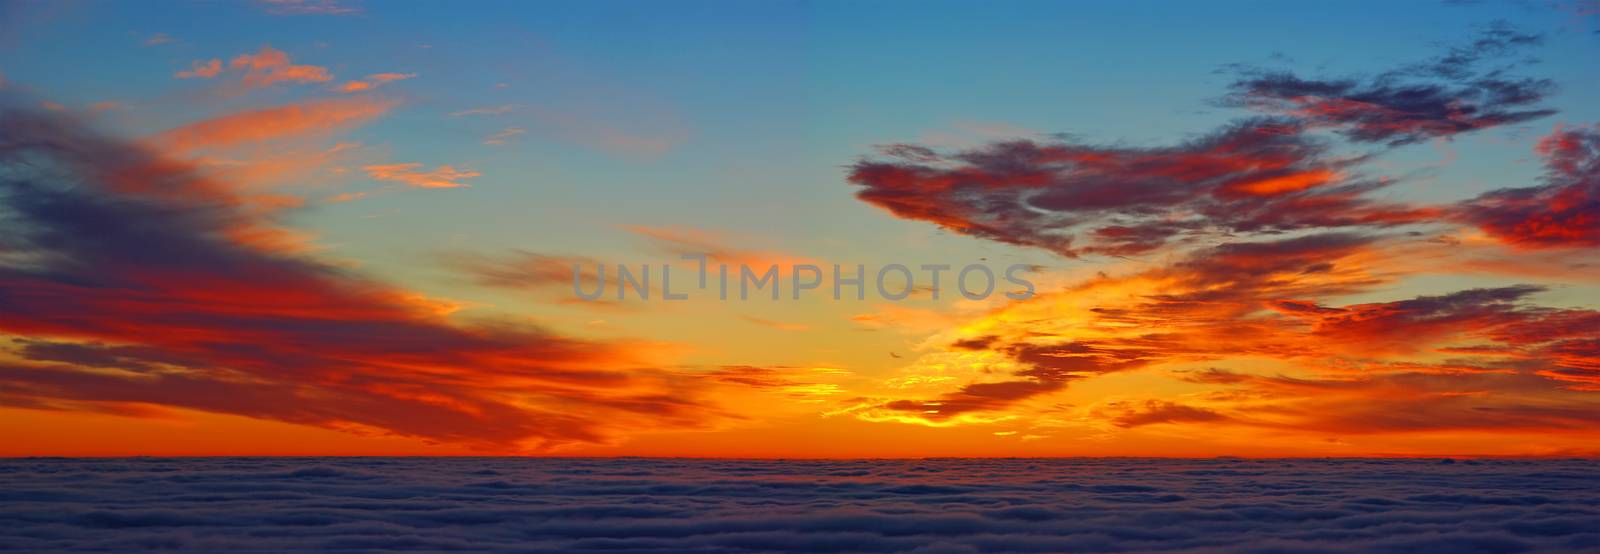 Sunrise panorama above clouds by savcoco